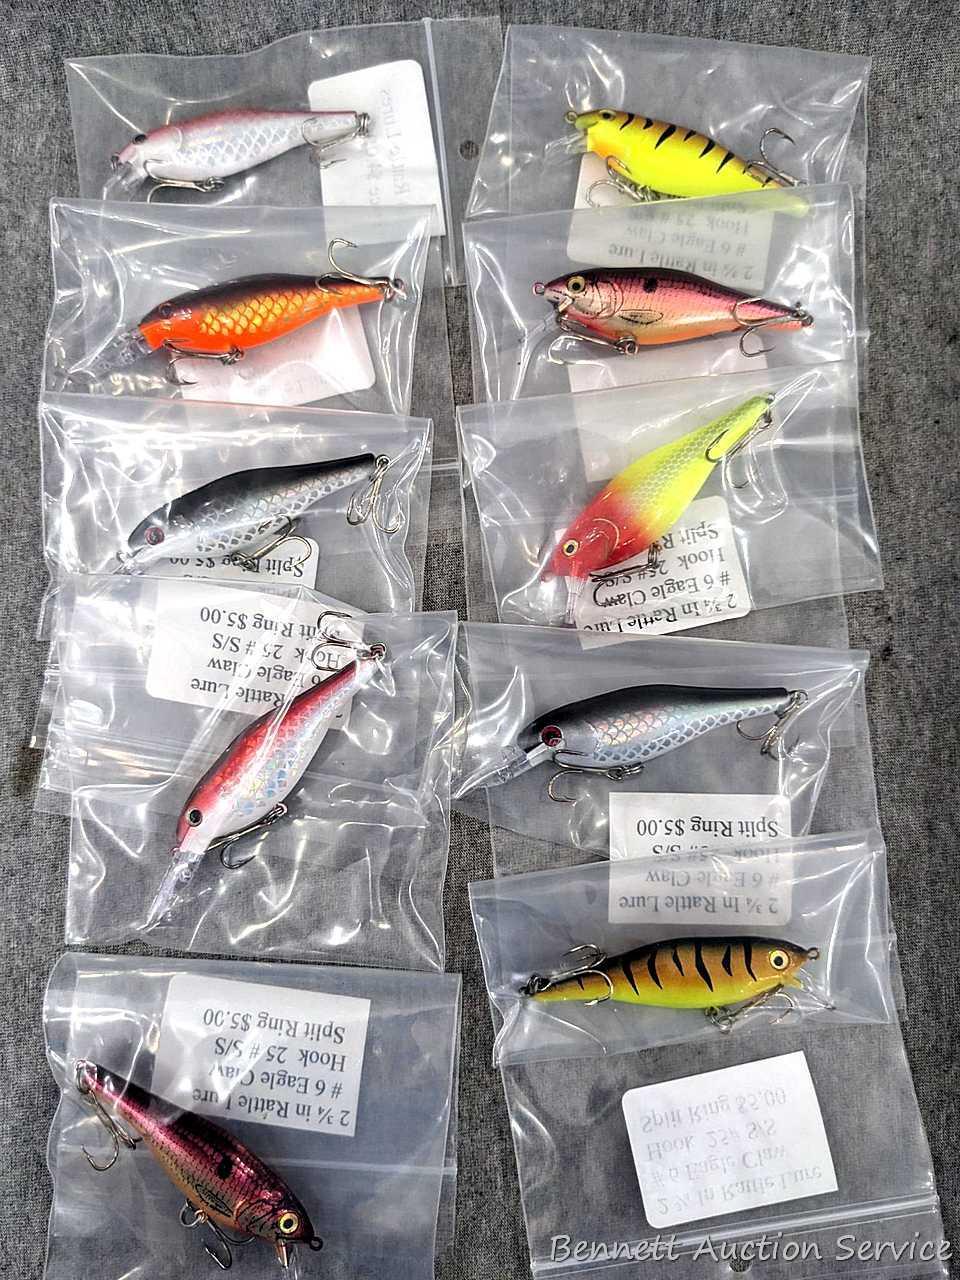 10 hard fishing lures, some or all rattle. Longer